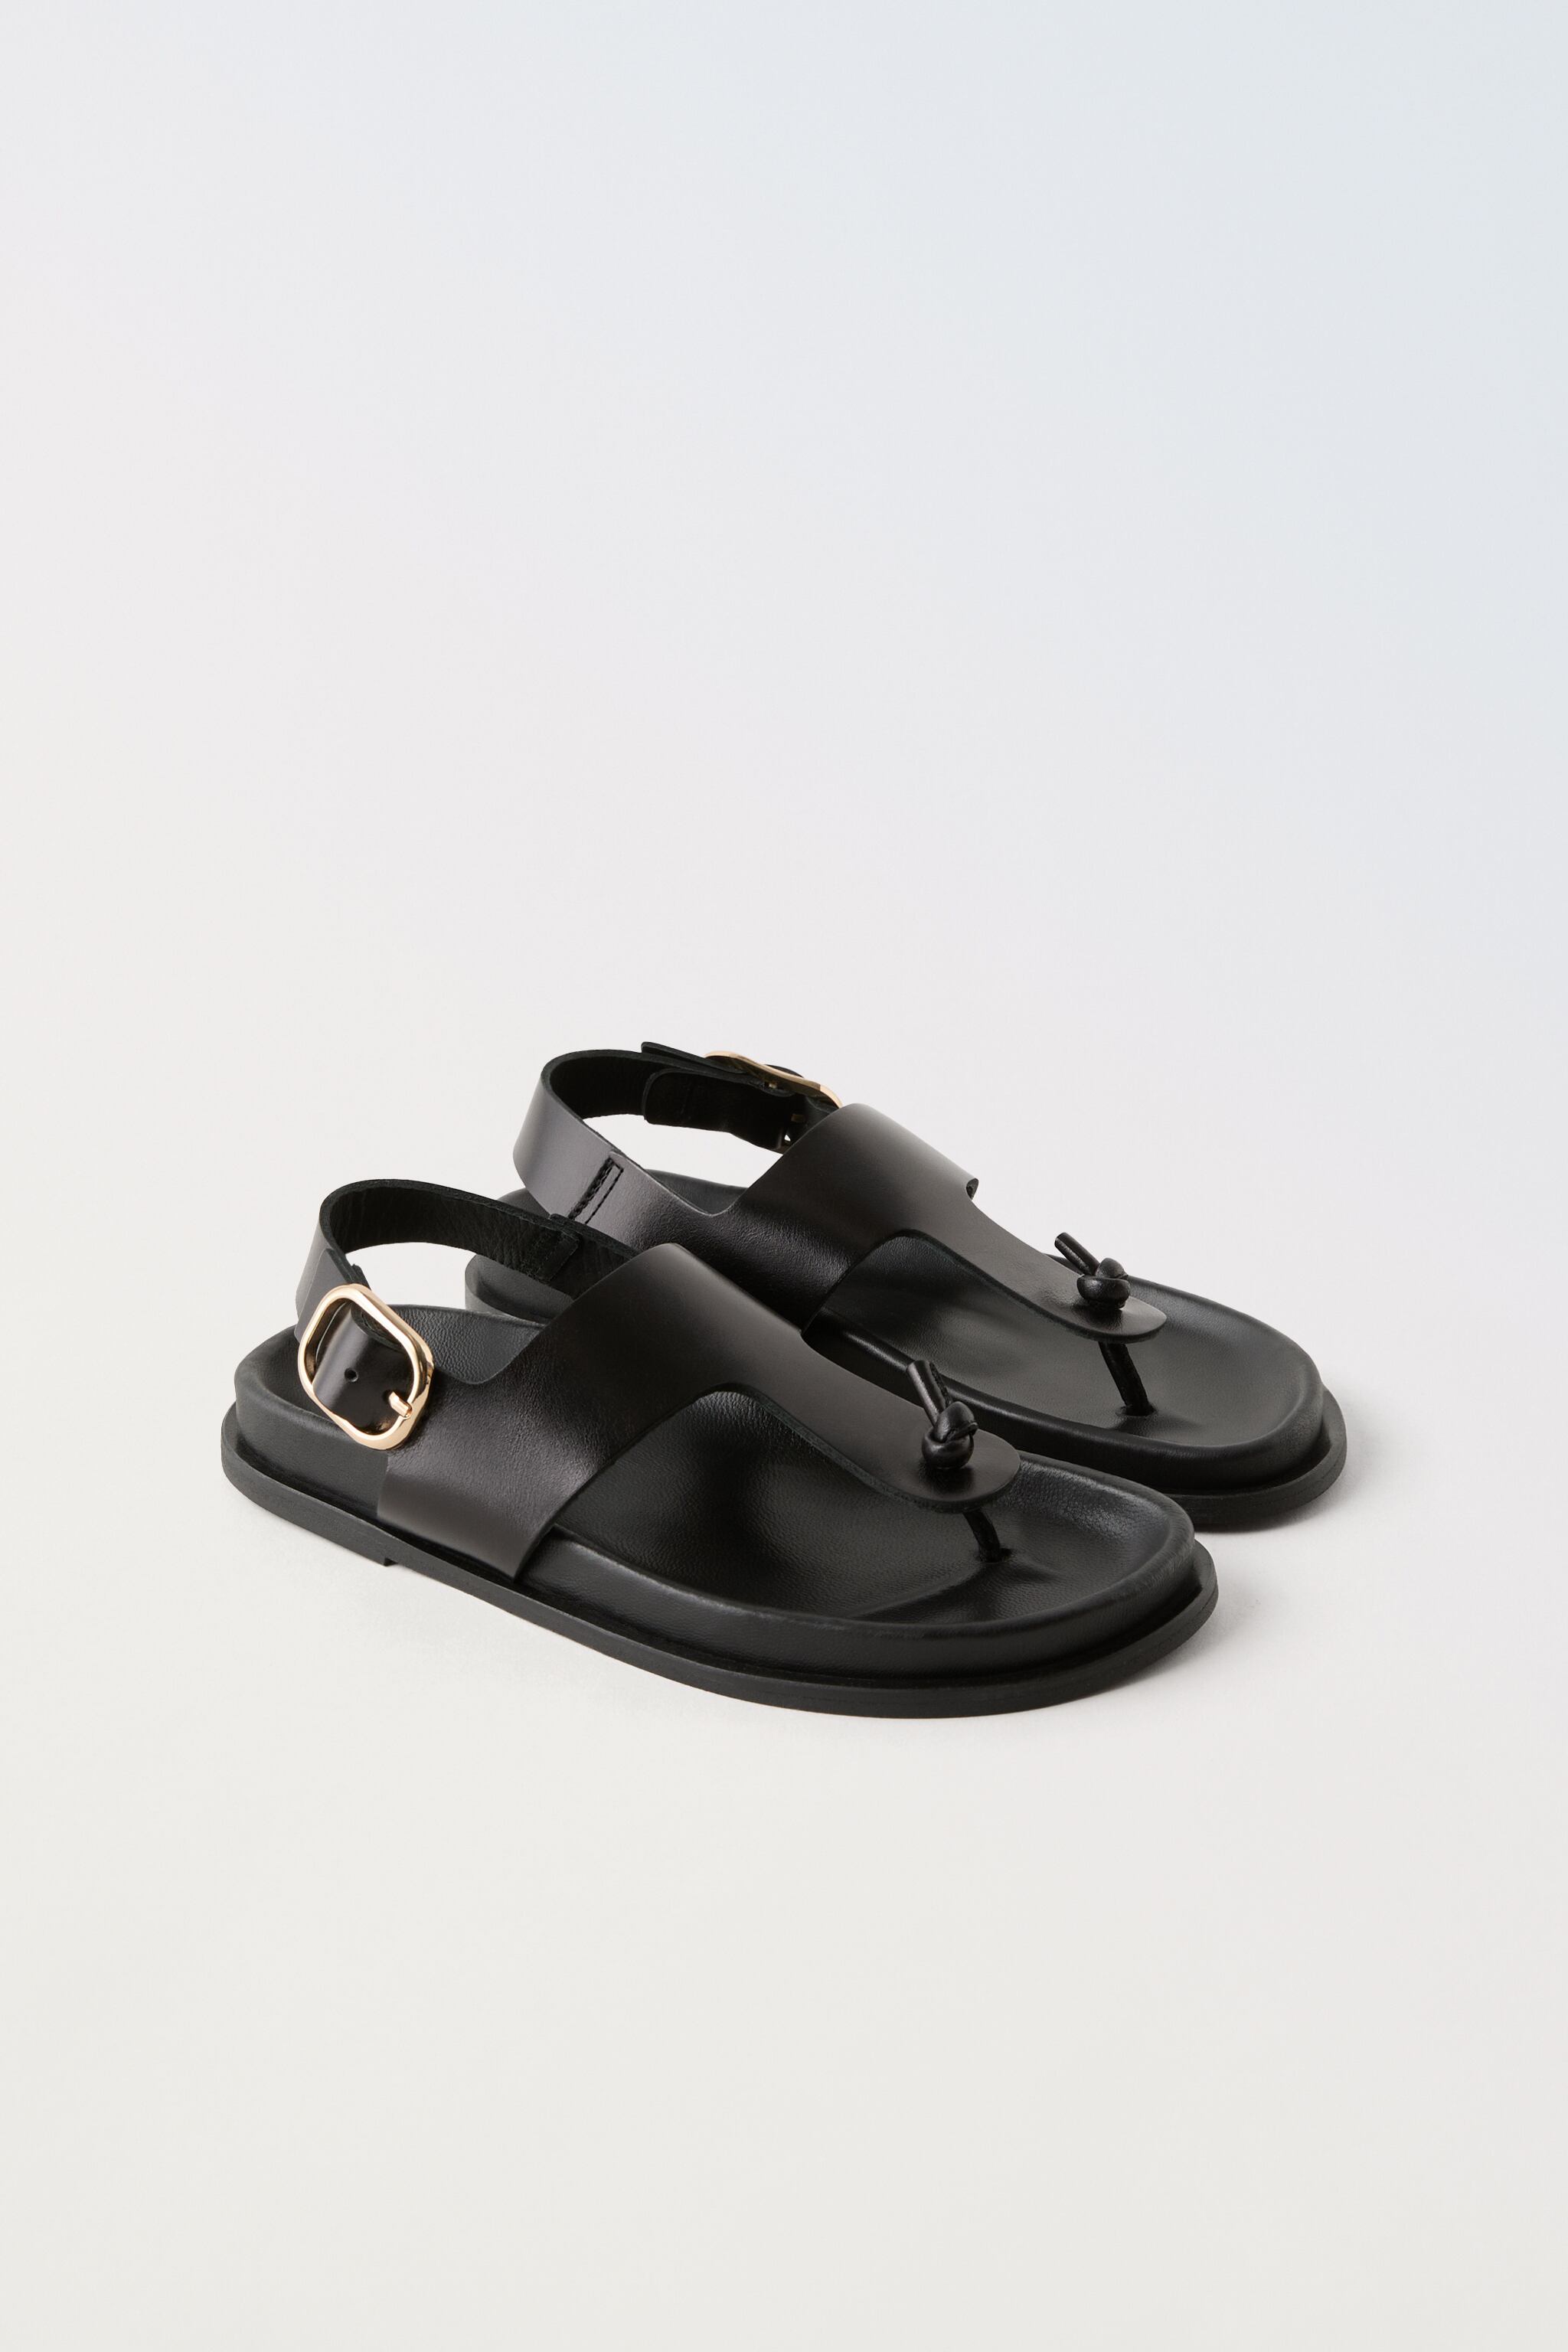 LEATHER SANDALS WITH BUCKLE